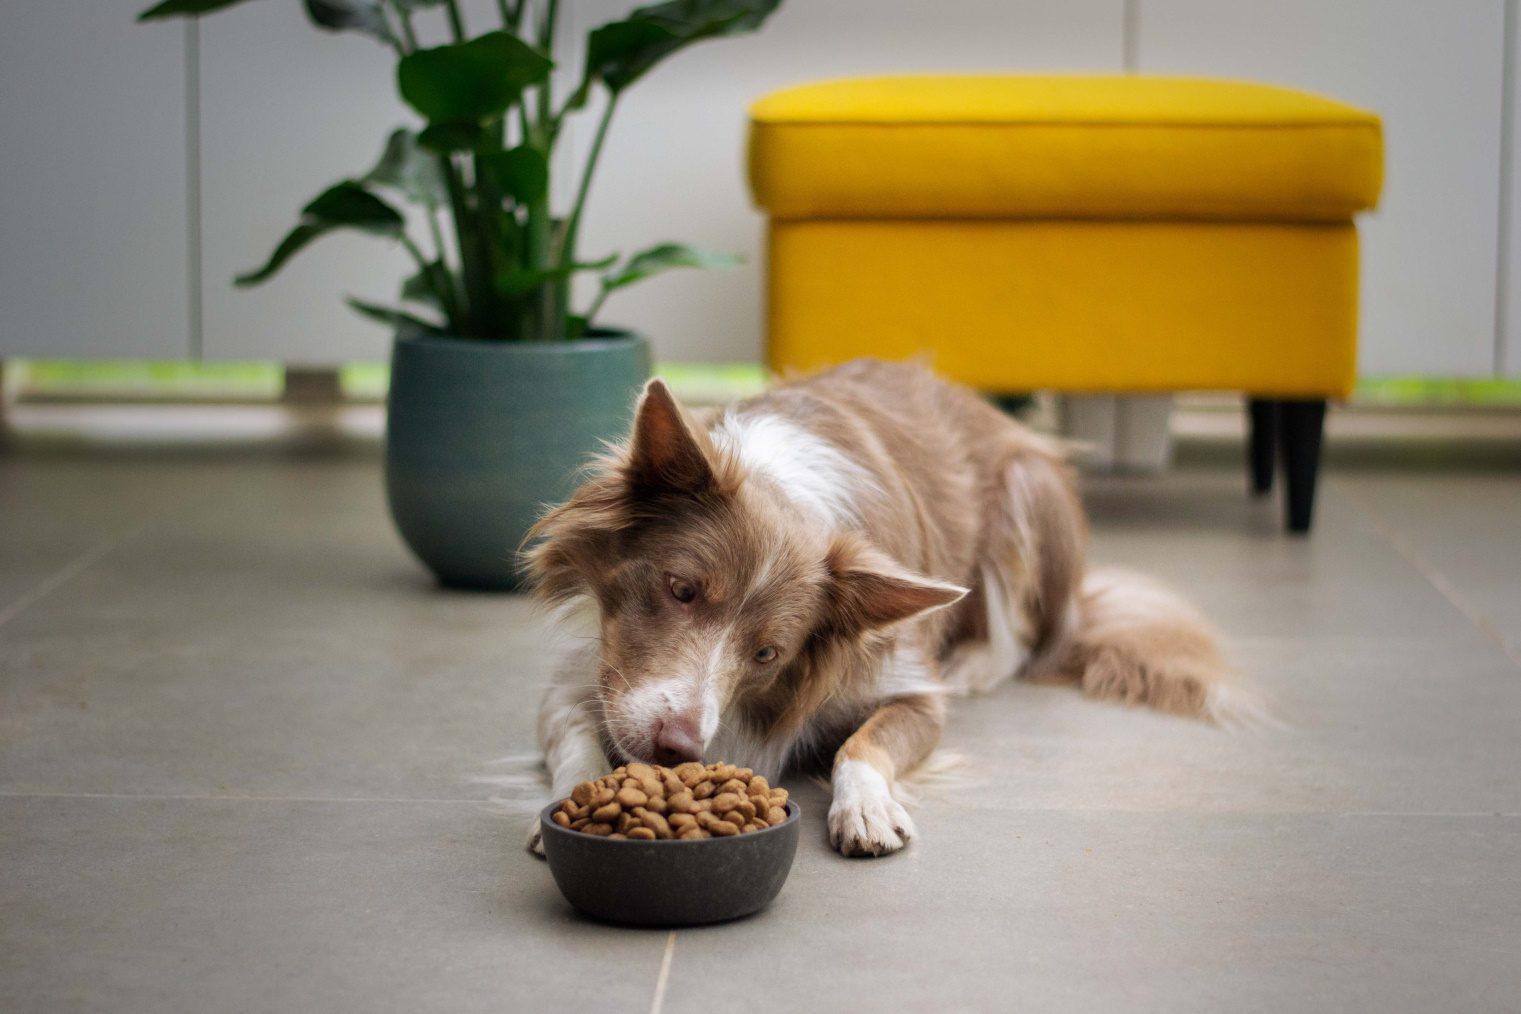 Border Collie lying in front of a bowl of kibble. Yellow ottoman and a green plant behind the dog.